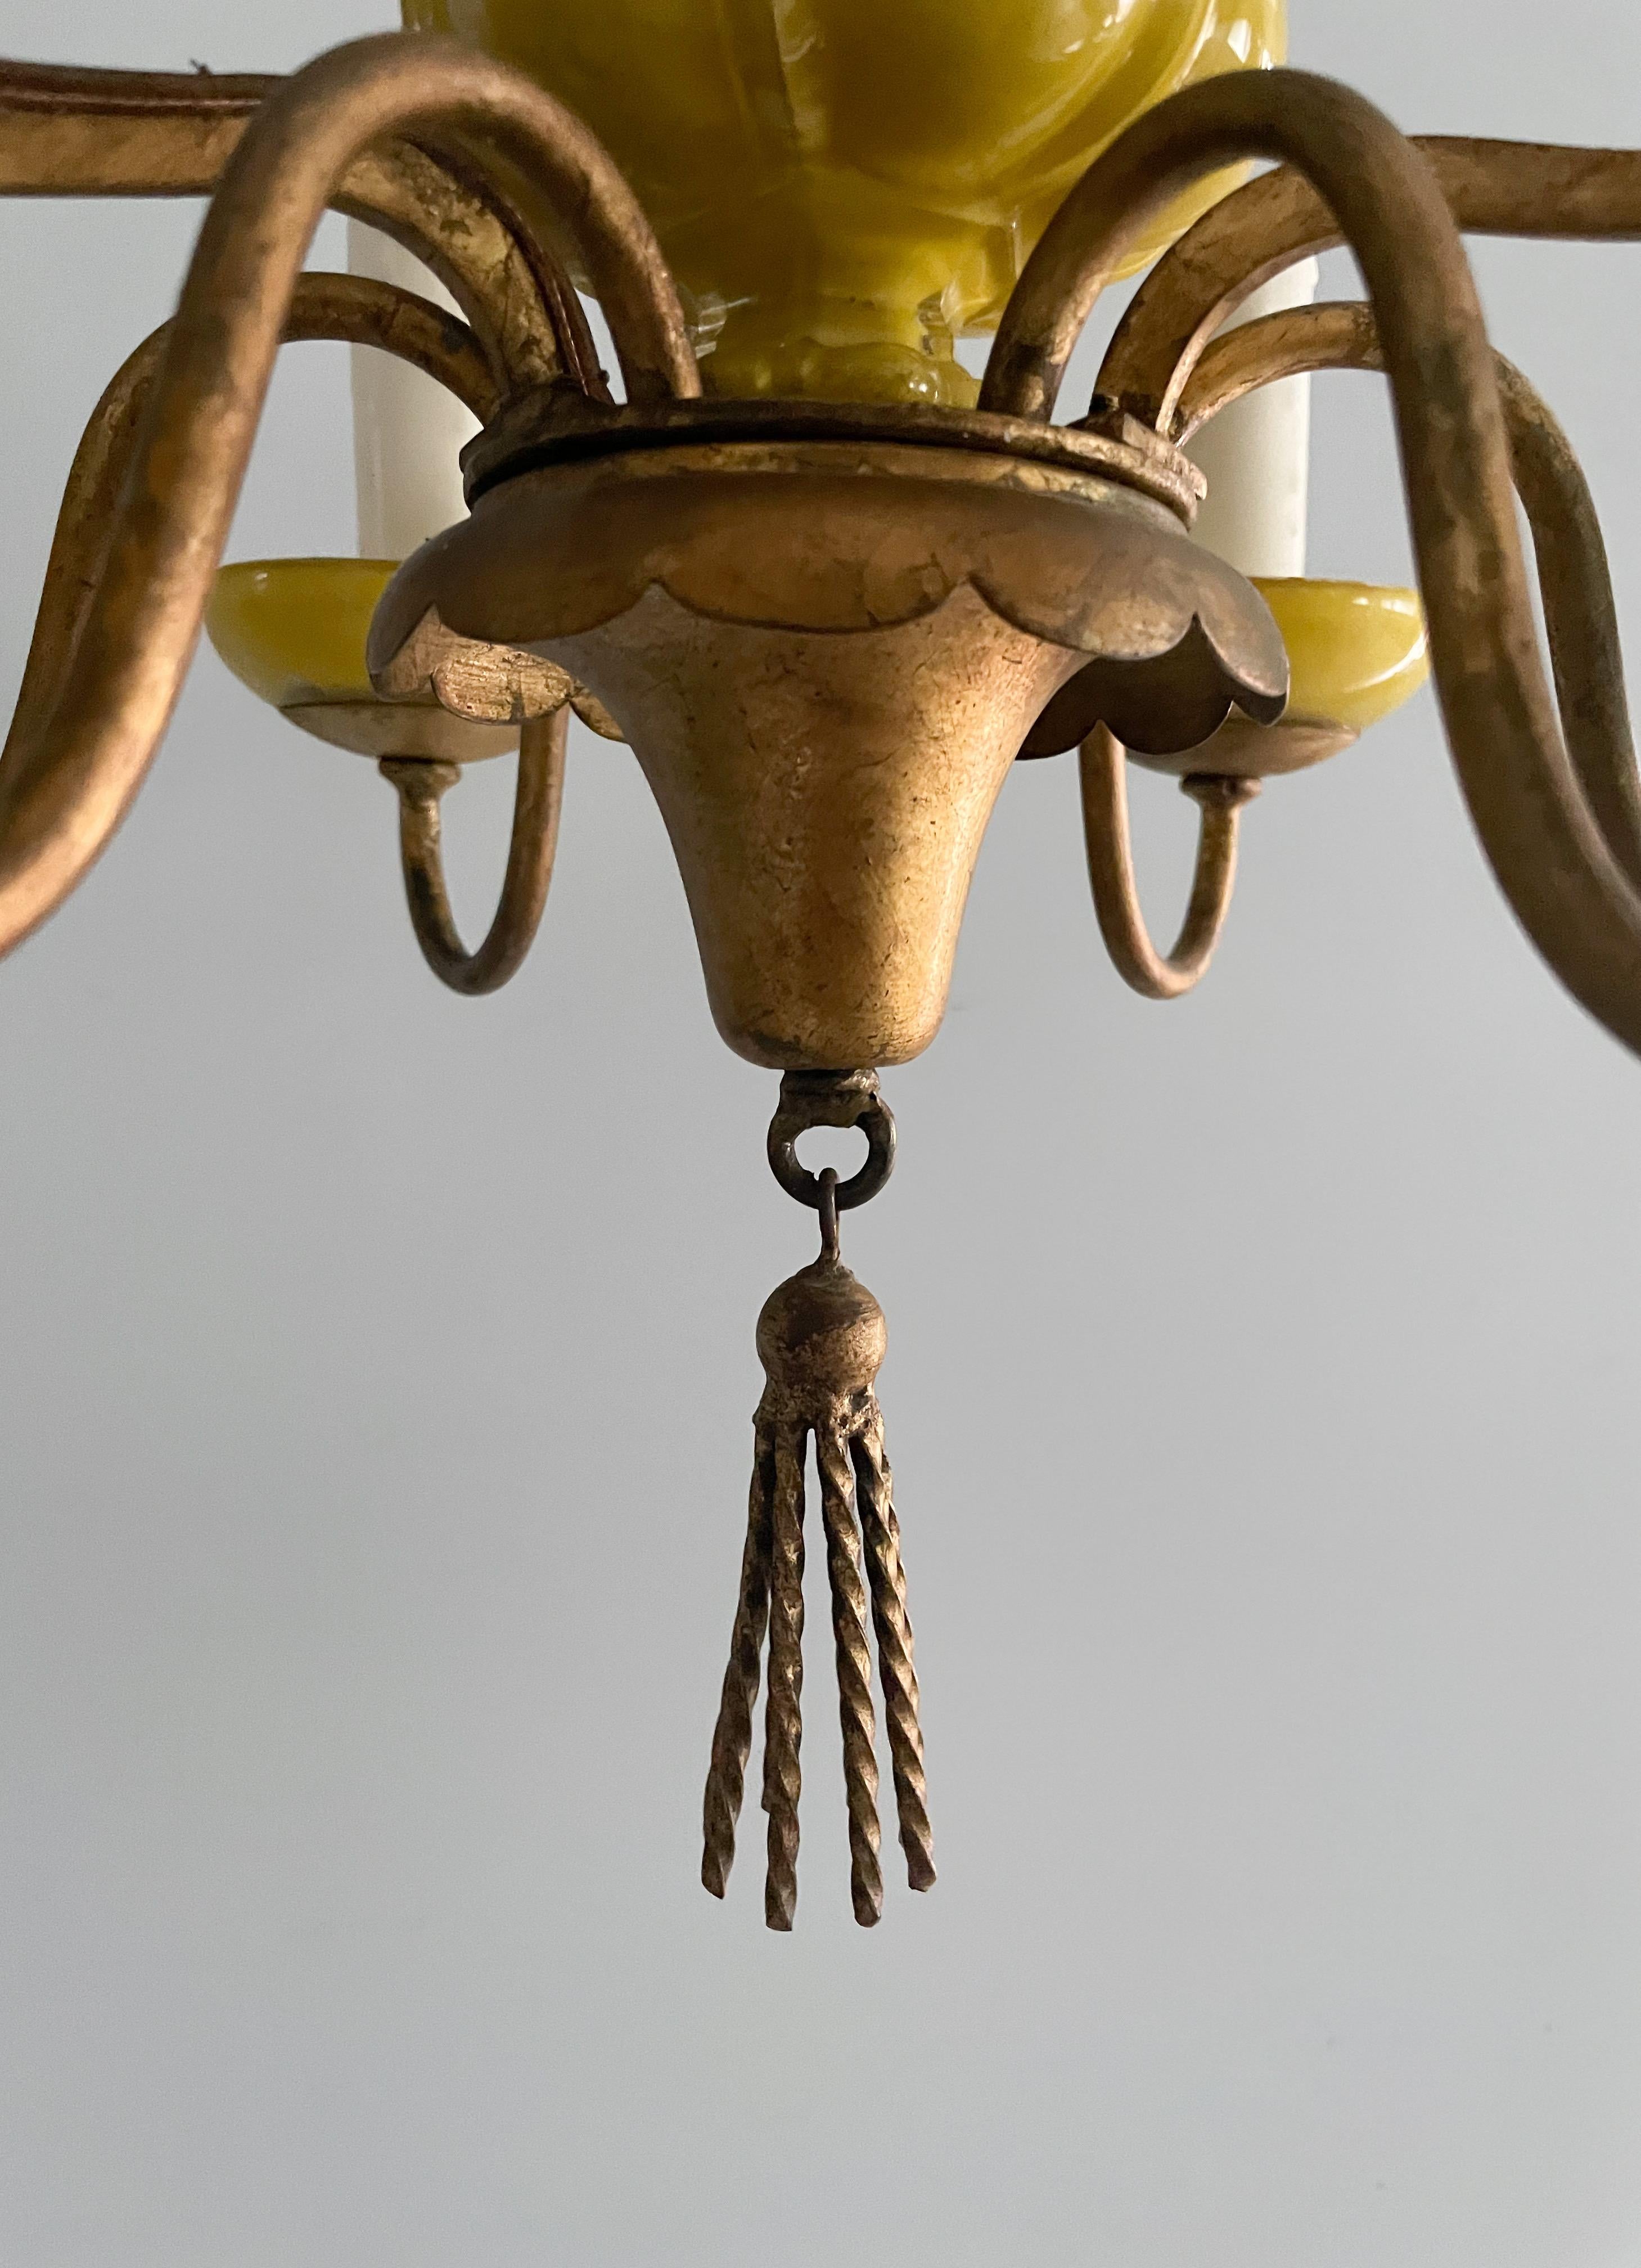 French Bagués-style Chandelier Imported by Paul Ferrante, Los Angeles 1